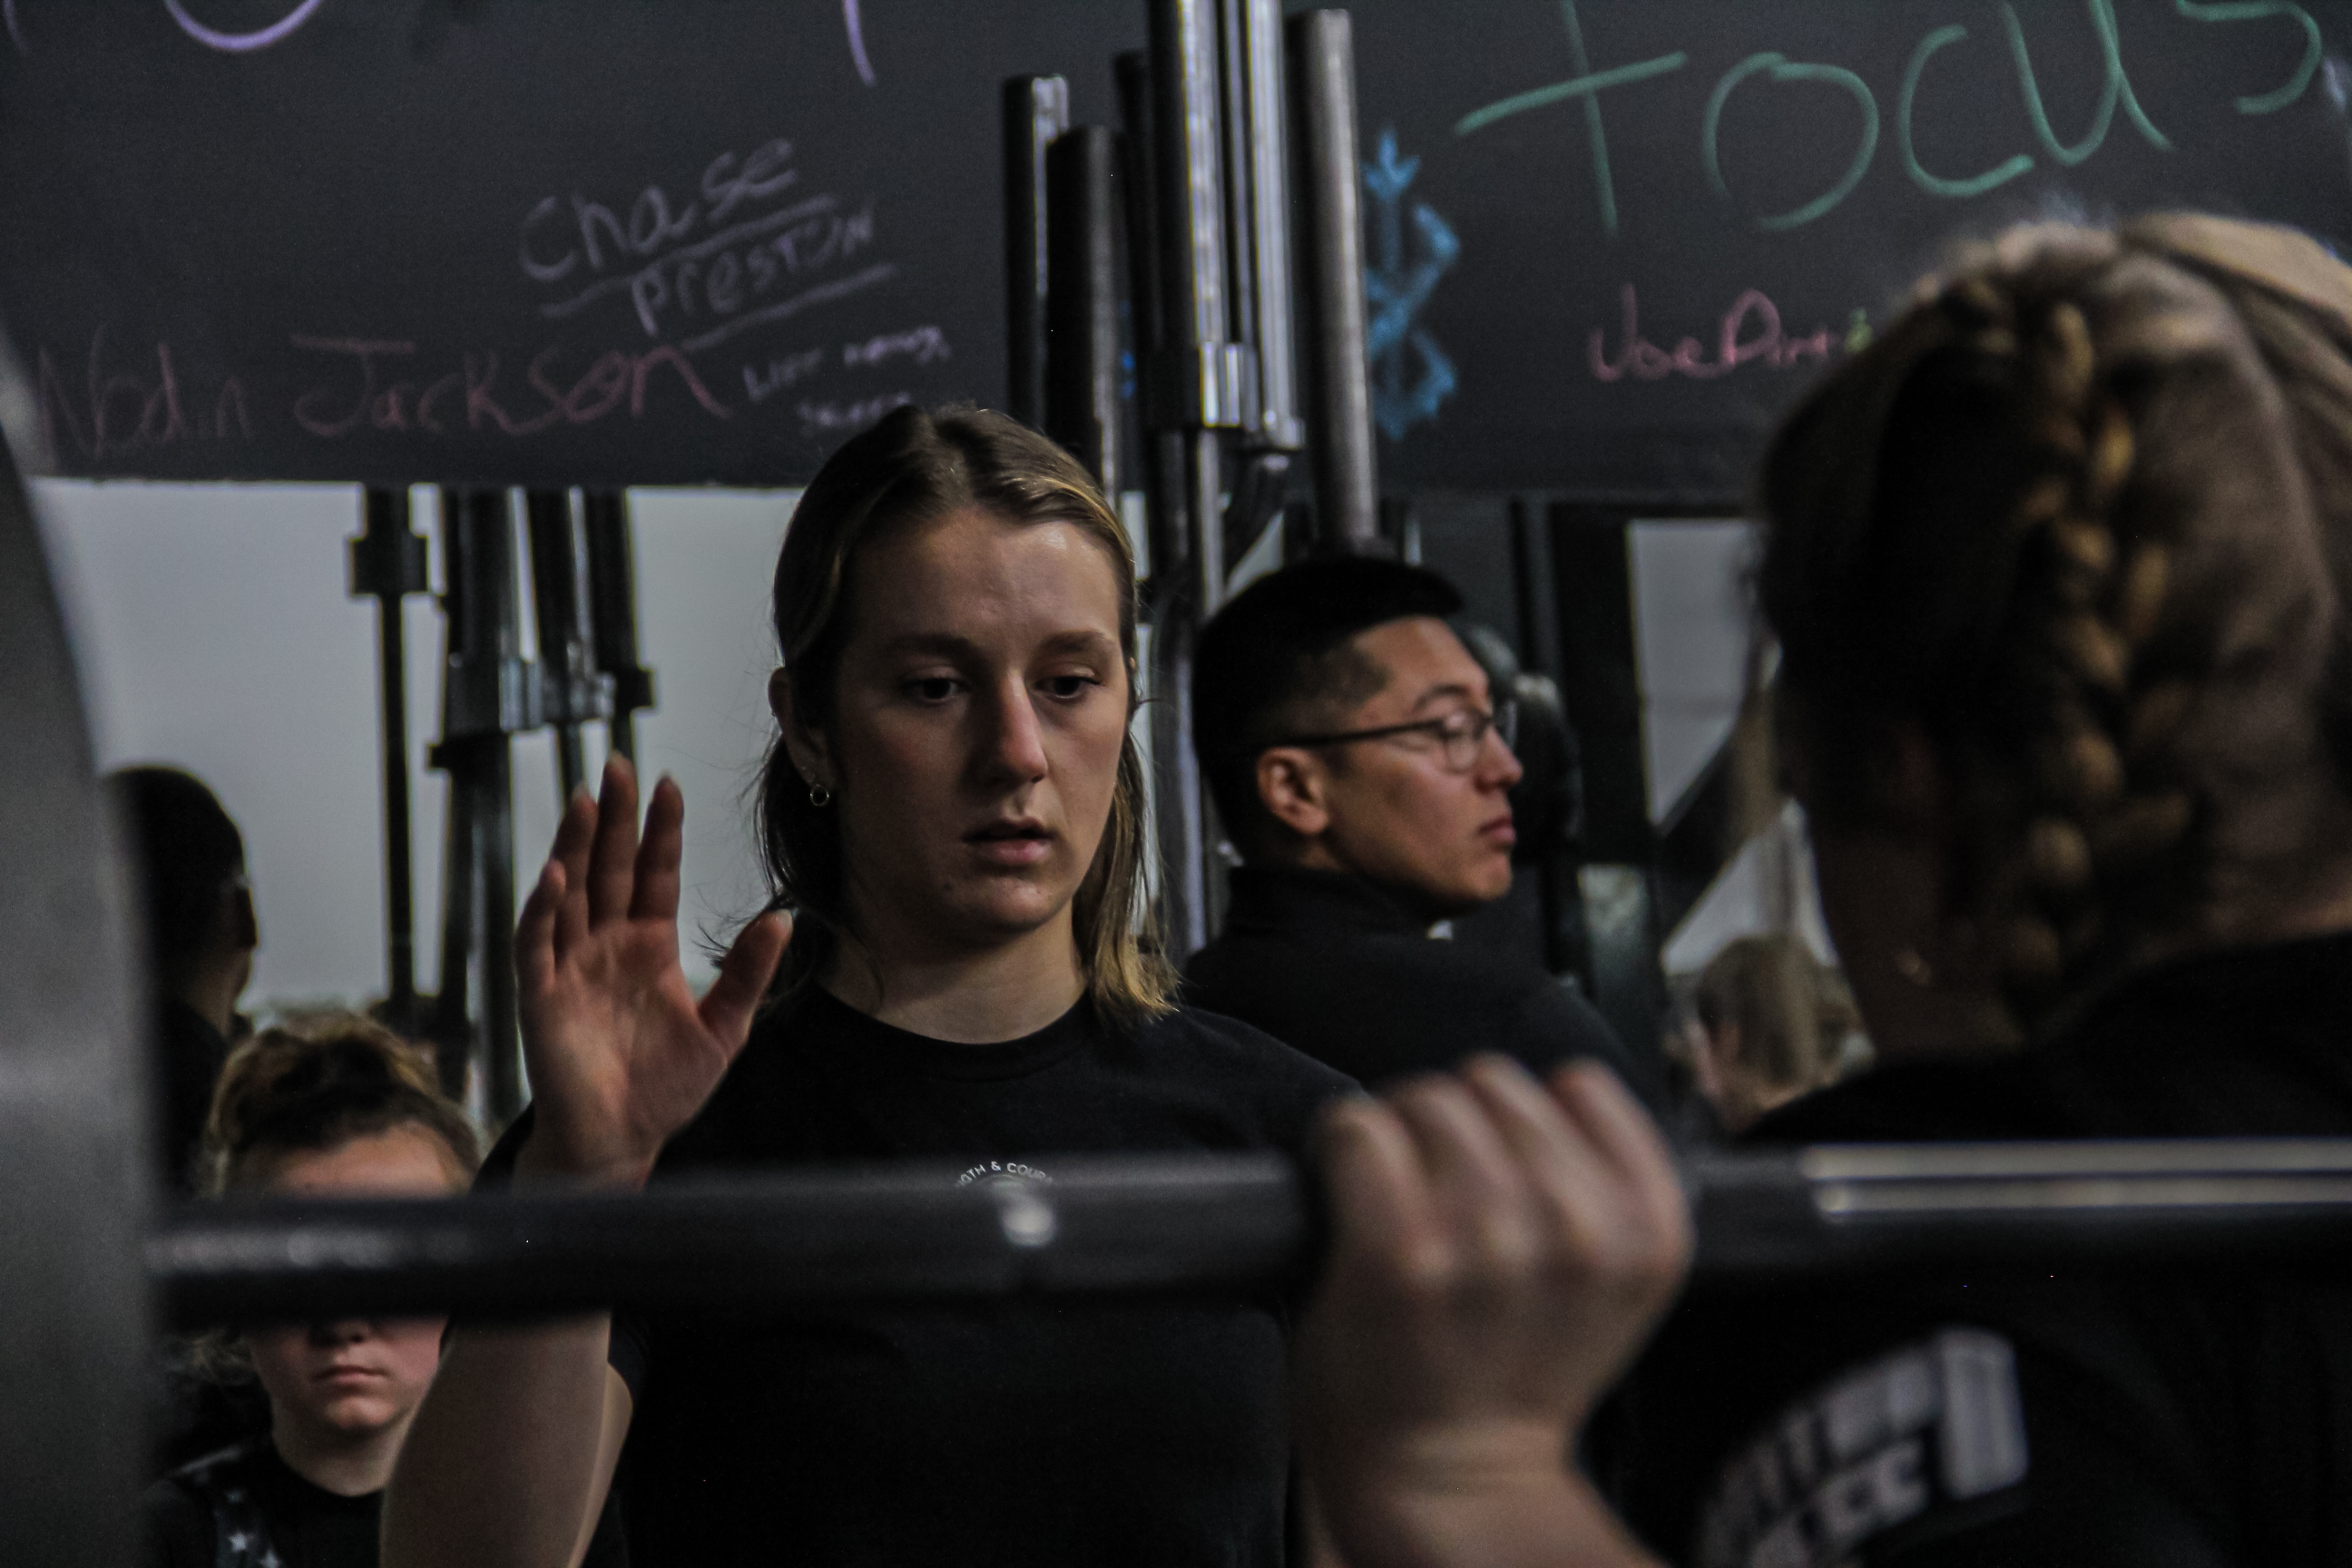 Julianna King coaching a CrossFit competition